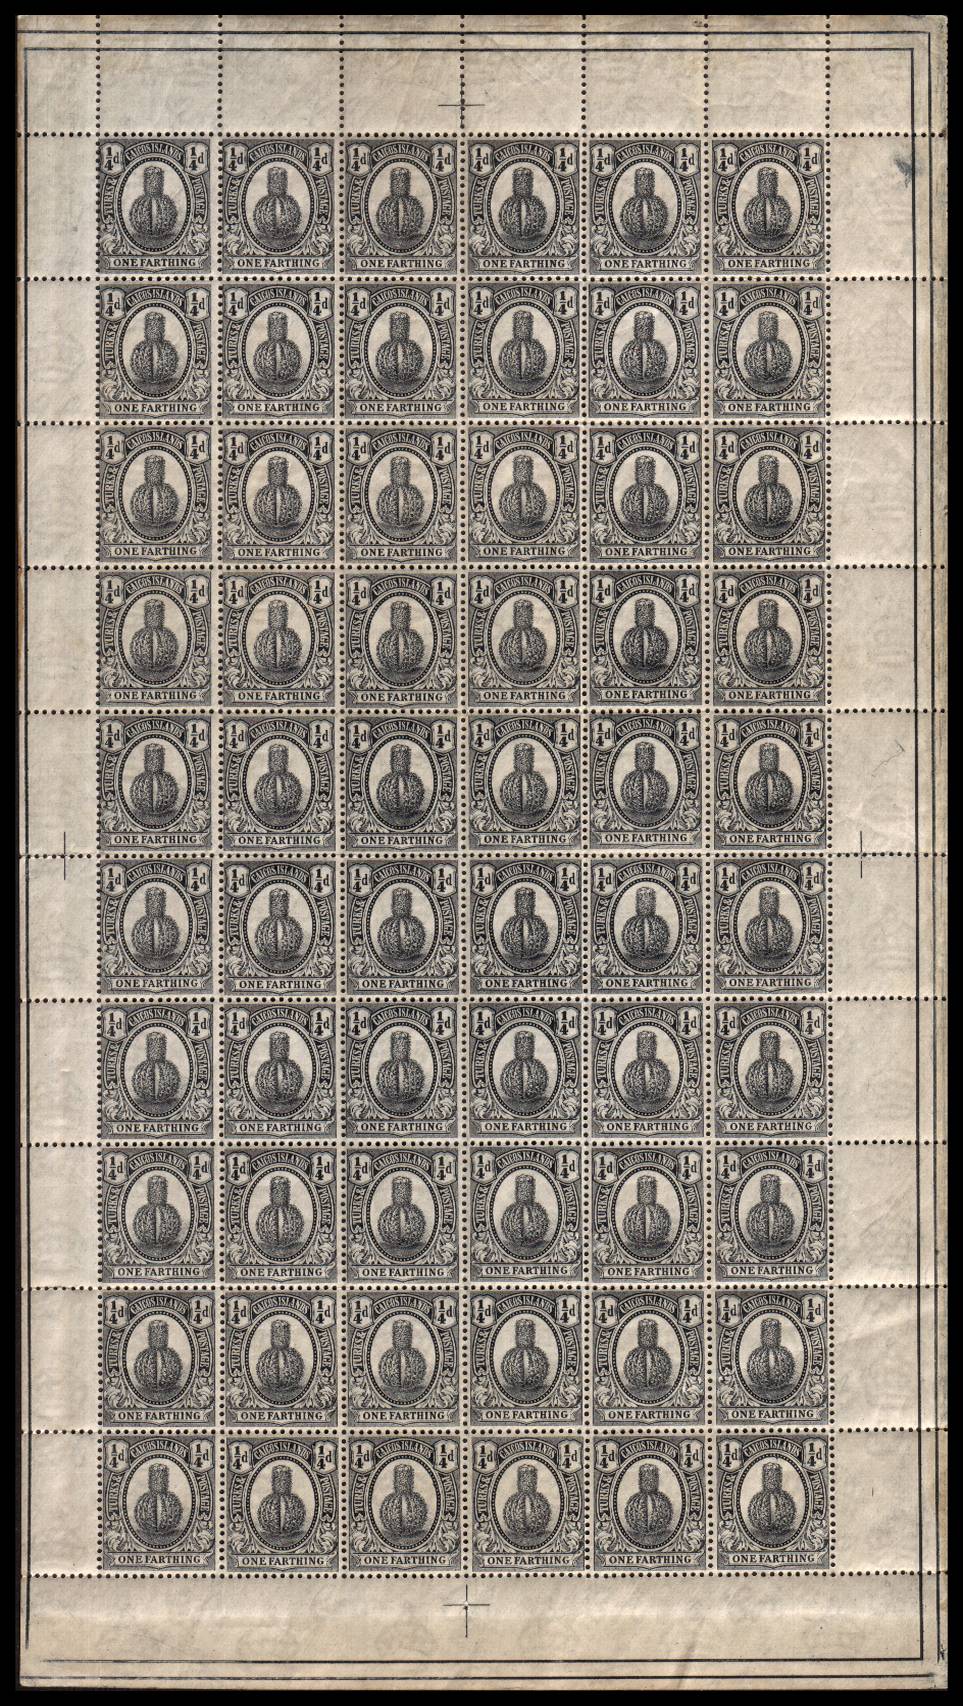 c Black - Multiple Script CA<br/>
A superb unmounted mint complete sheet of sixty.<br/>
A lovely ''album sized'' sheet. Pretty! <br/>SG Cat for mounted singles 90
<br/><b>QLX</b>